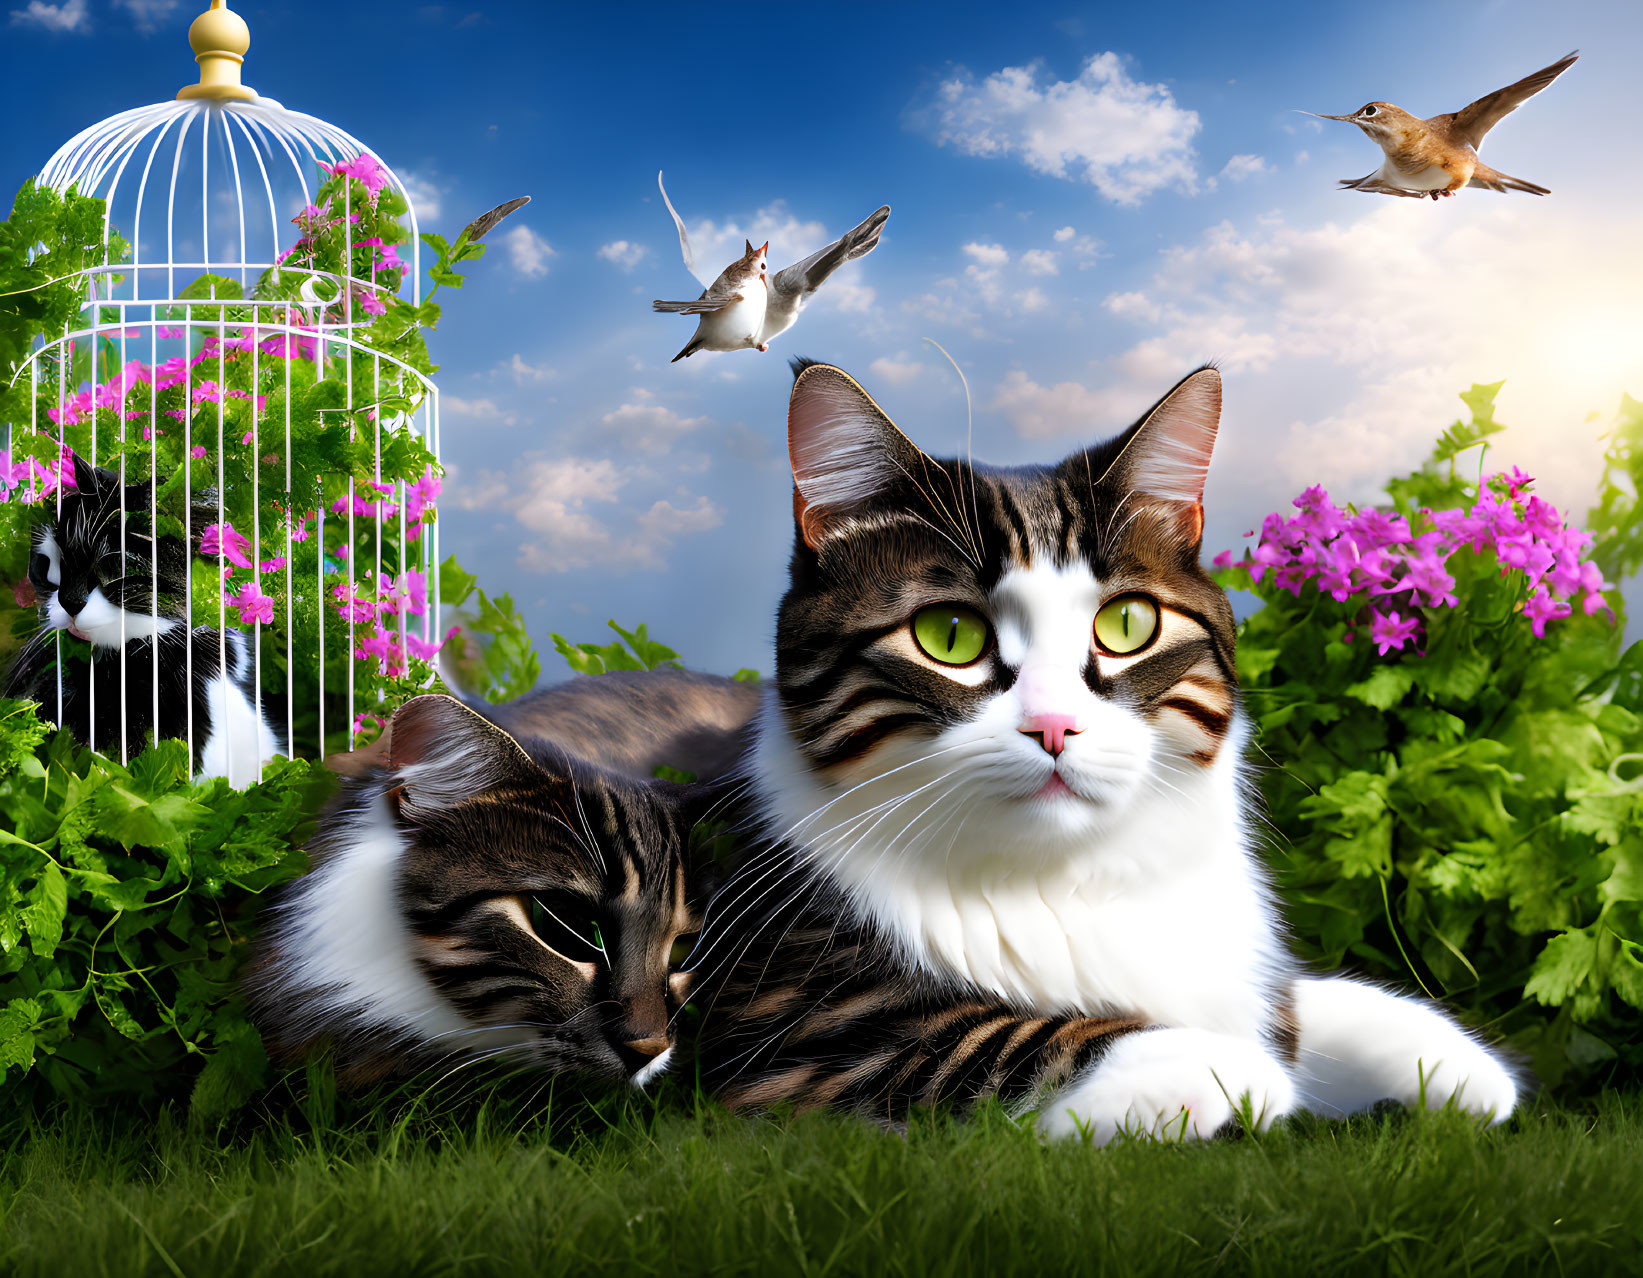 Two Cats Relaxing in Grass with Birdcage and Flying Birds on Blue Sky Background